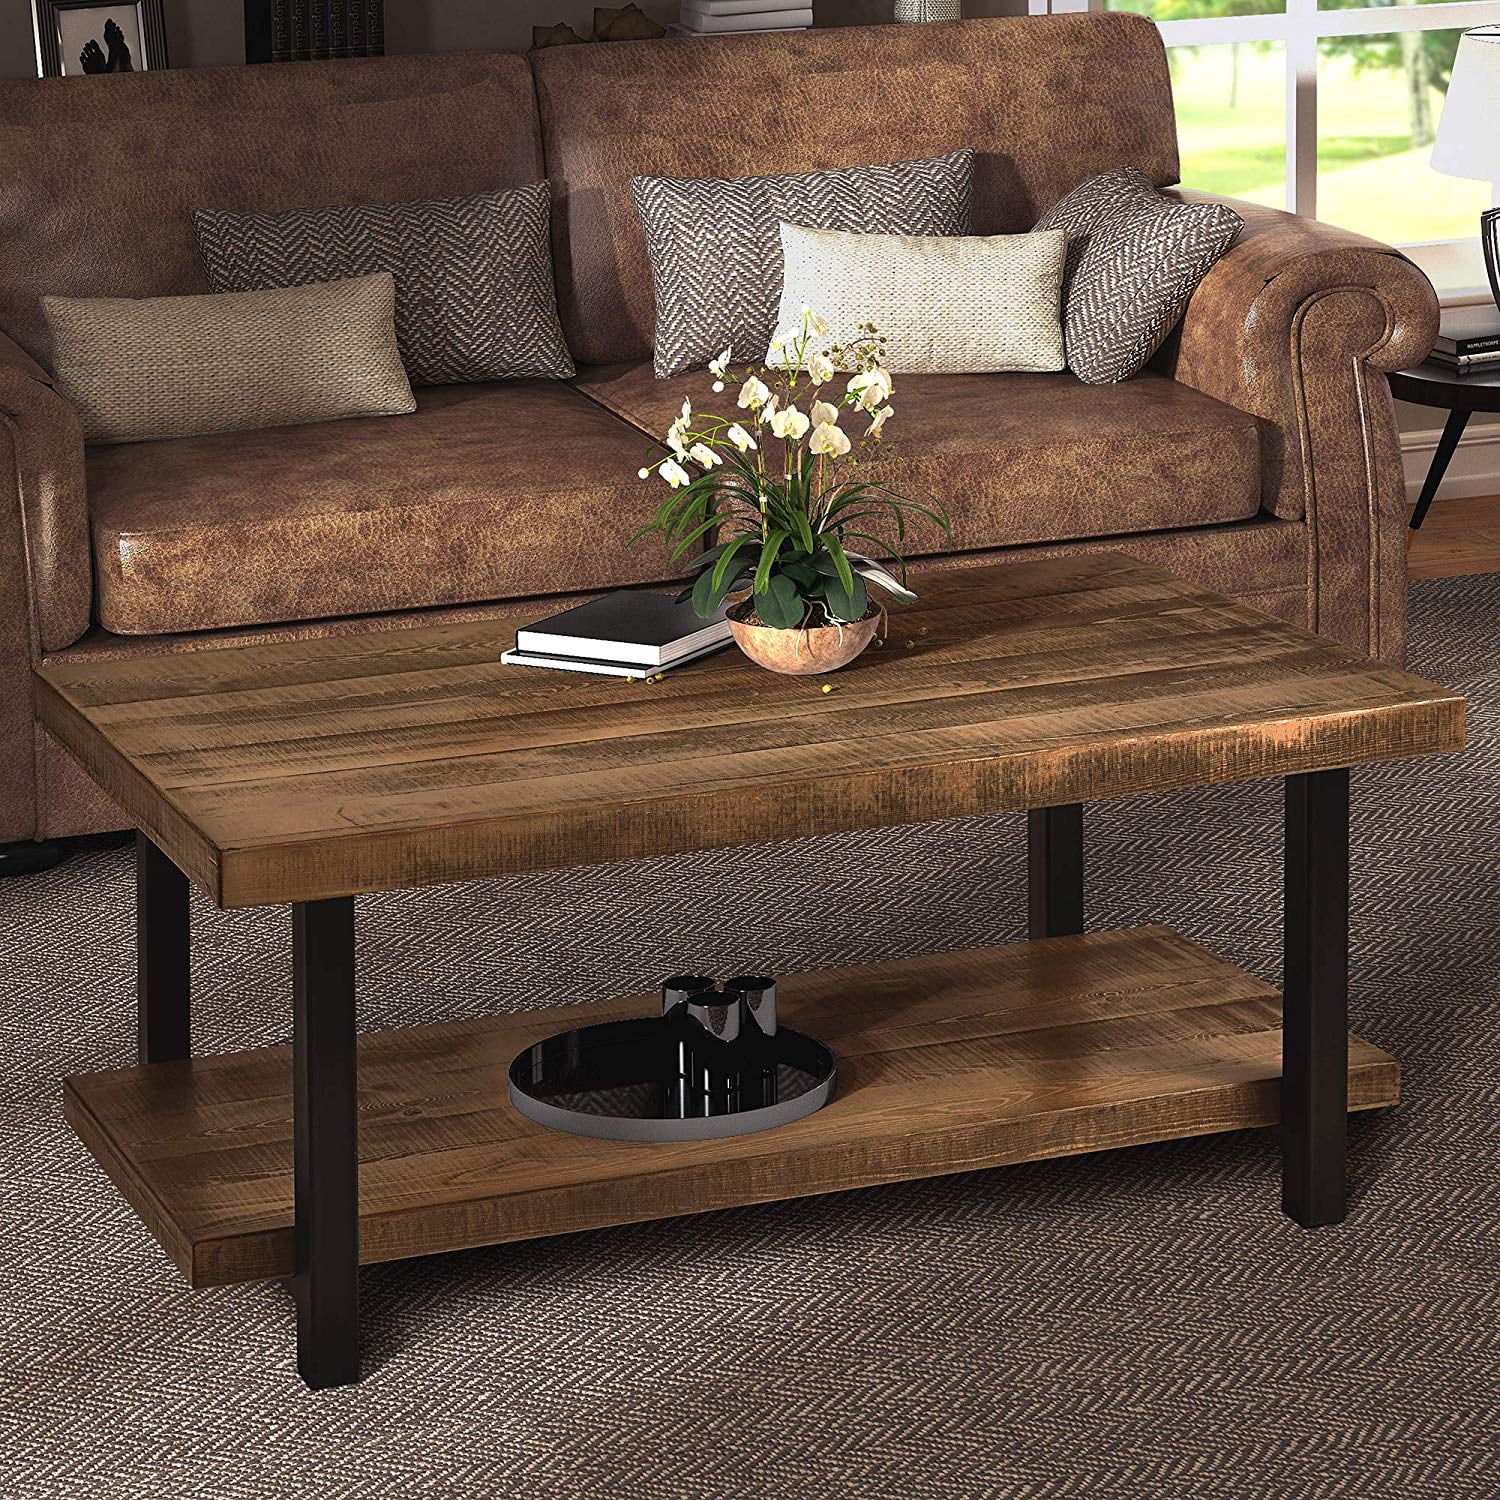 Harper&bright Designs Industrial Rectangular Pine Wood Coffee Table Inside Brown Rustic Coffee Tables (Photo 8 of 15)